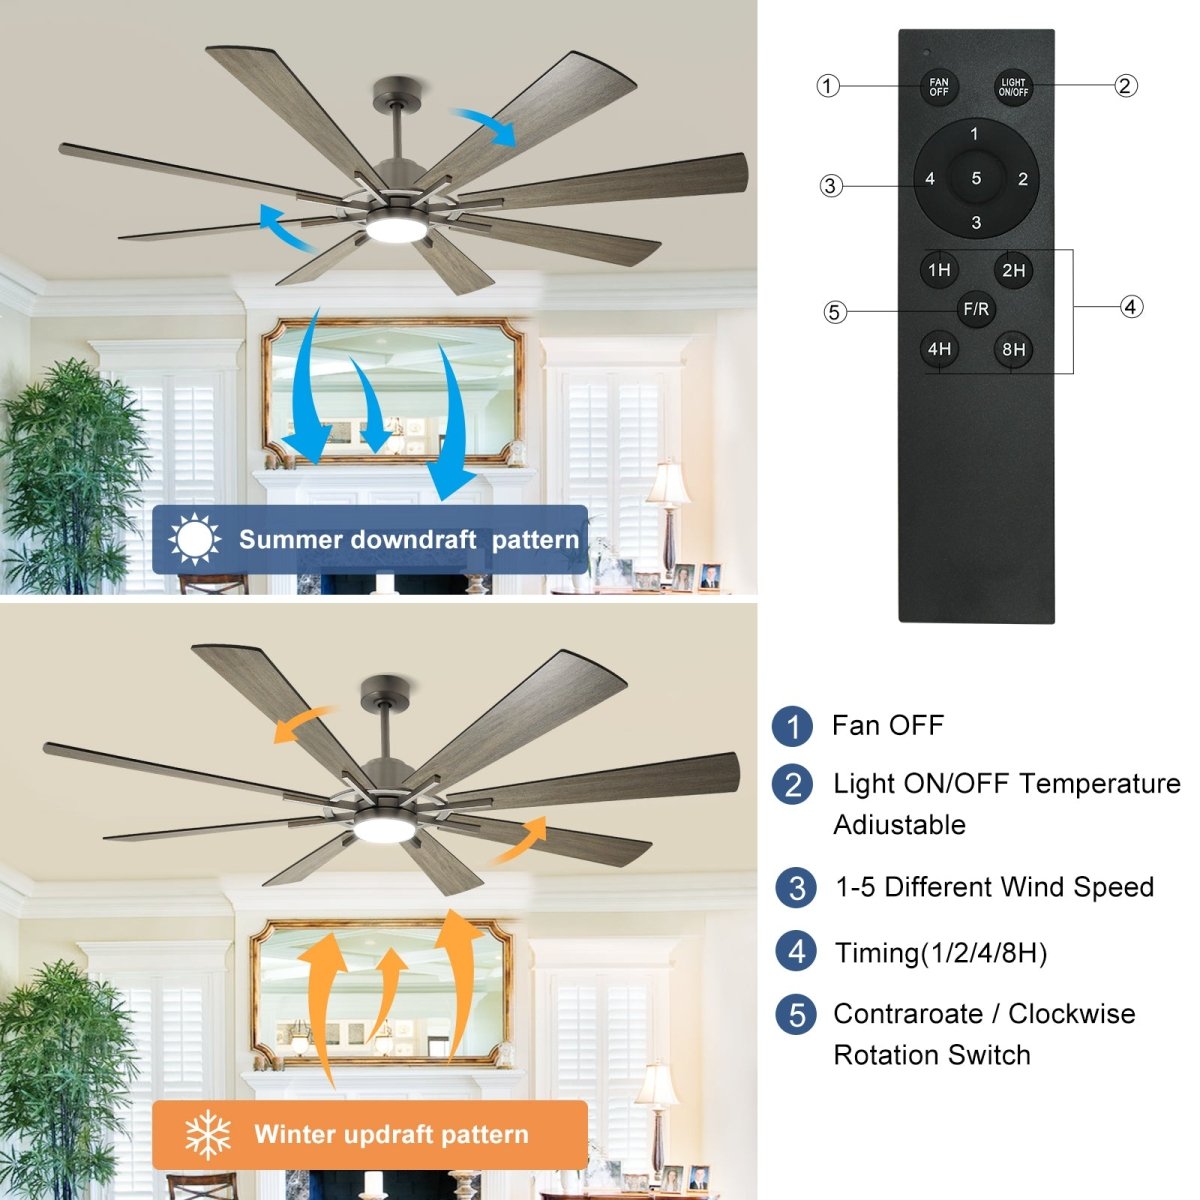 Depuley Large Ceiling Fan with Lights, 72" DC Reversible Ceiling Fan with Light LED, 8 Plywood Blades 5 Speed, Modern Industrial Ceiling Fans Indoor for Living Room, Color Changeable 3000K-6000K, Gray - WS-FPZ45-18C-GR 3 | DEPULEY